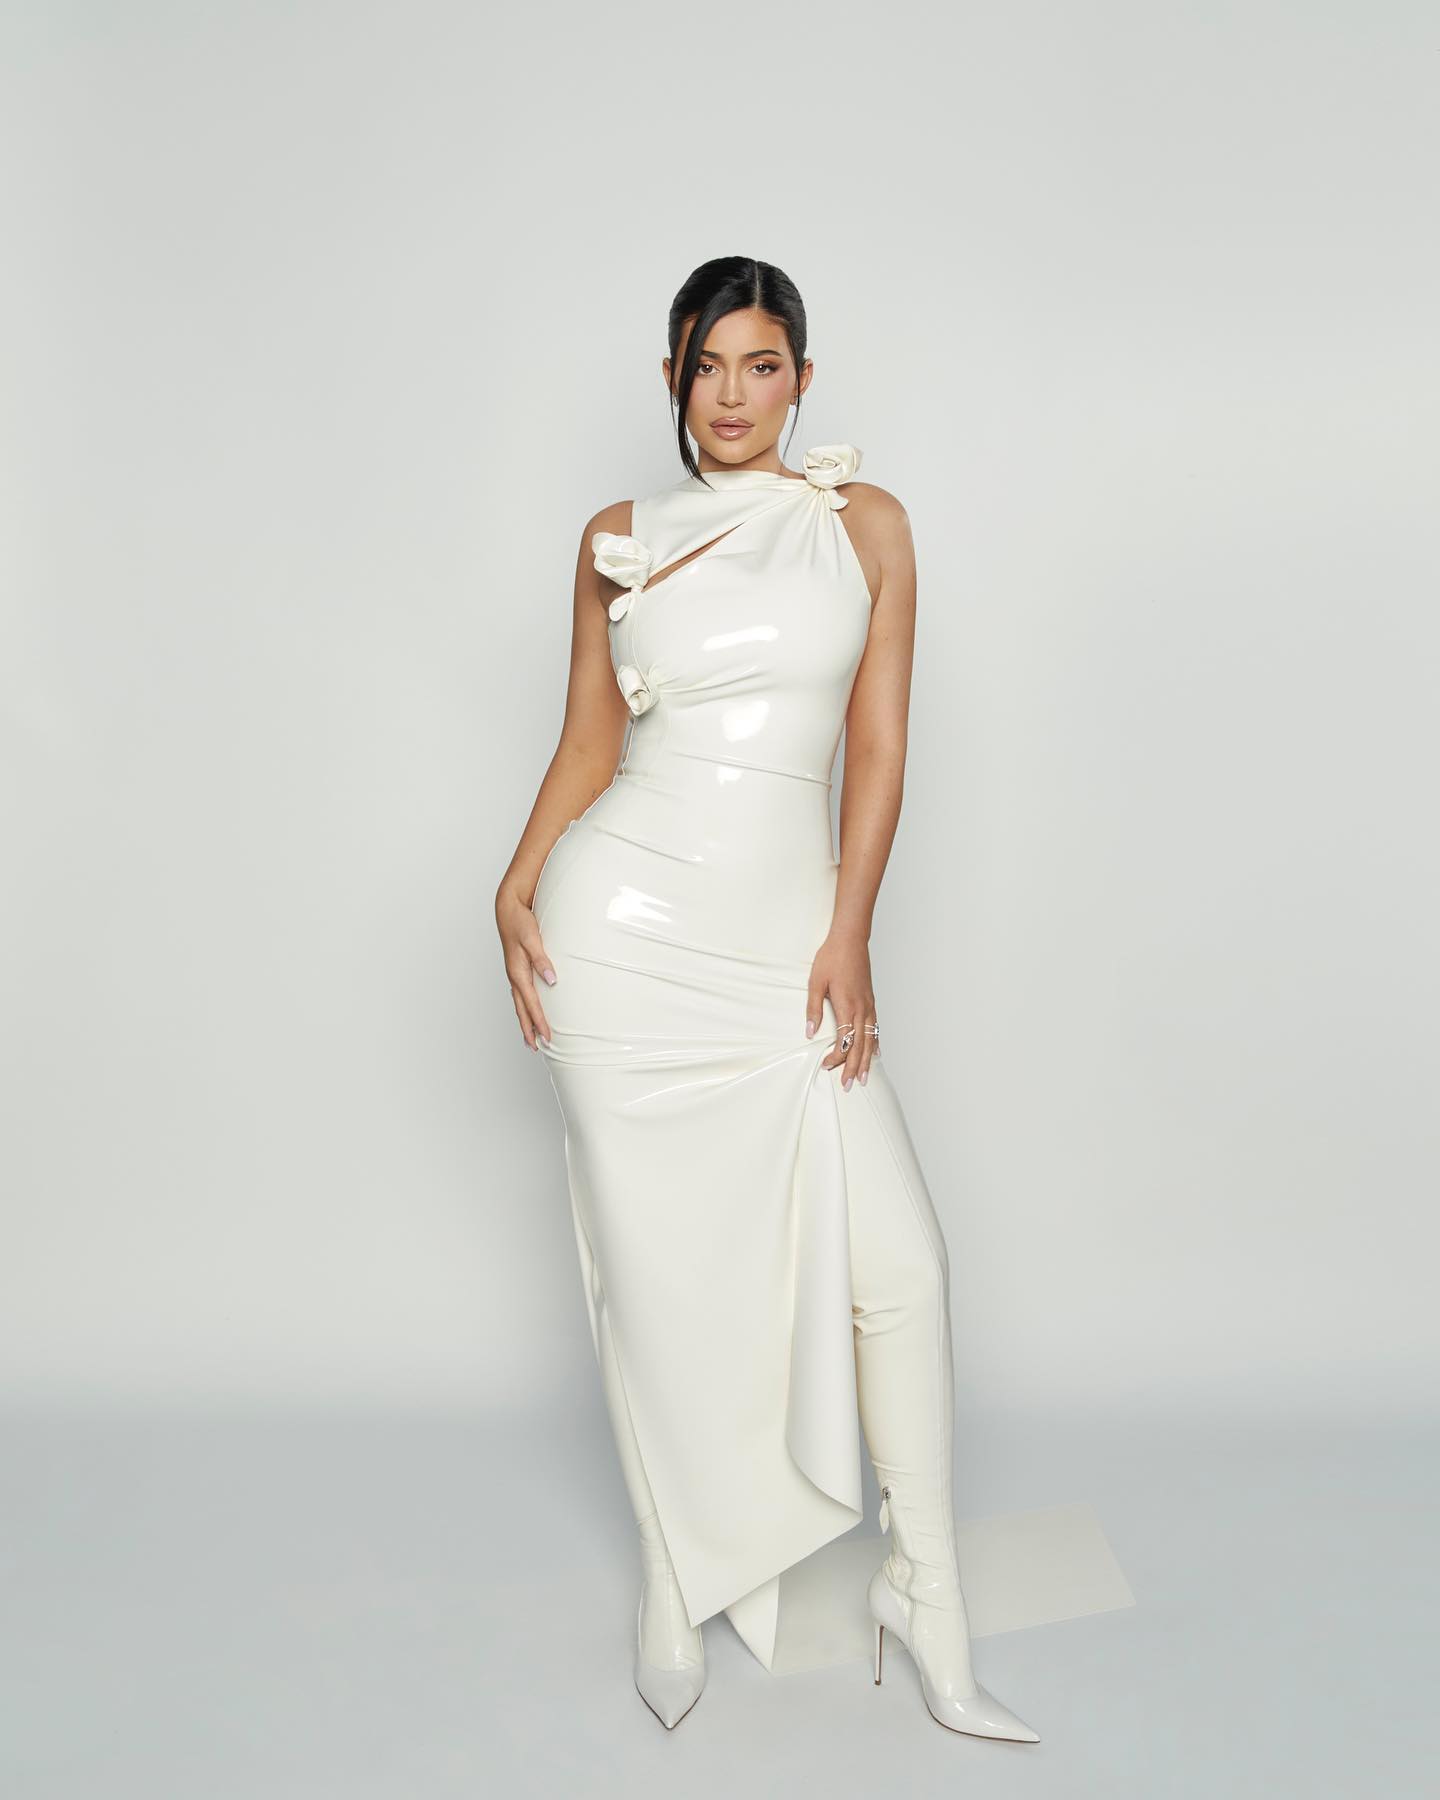 Kylie Jenner in White Outfit The Kardashians Hulu Premiere, April 2022